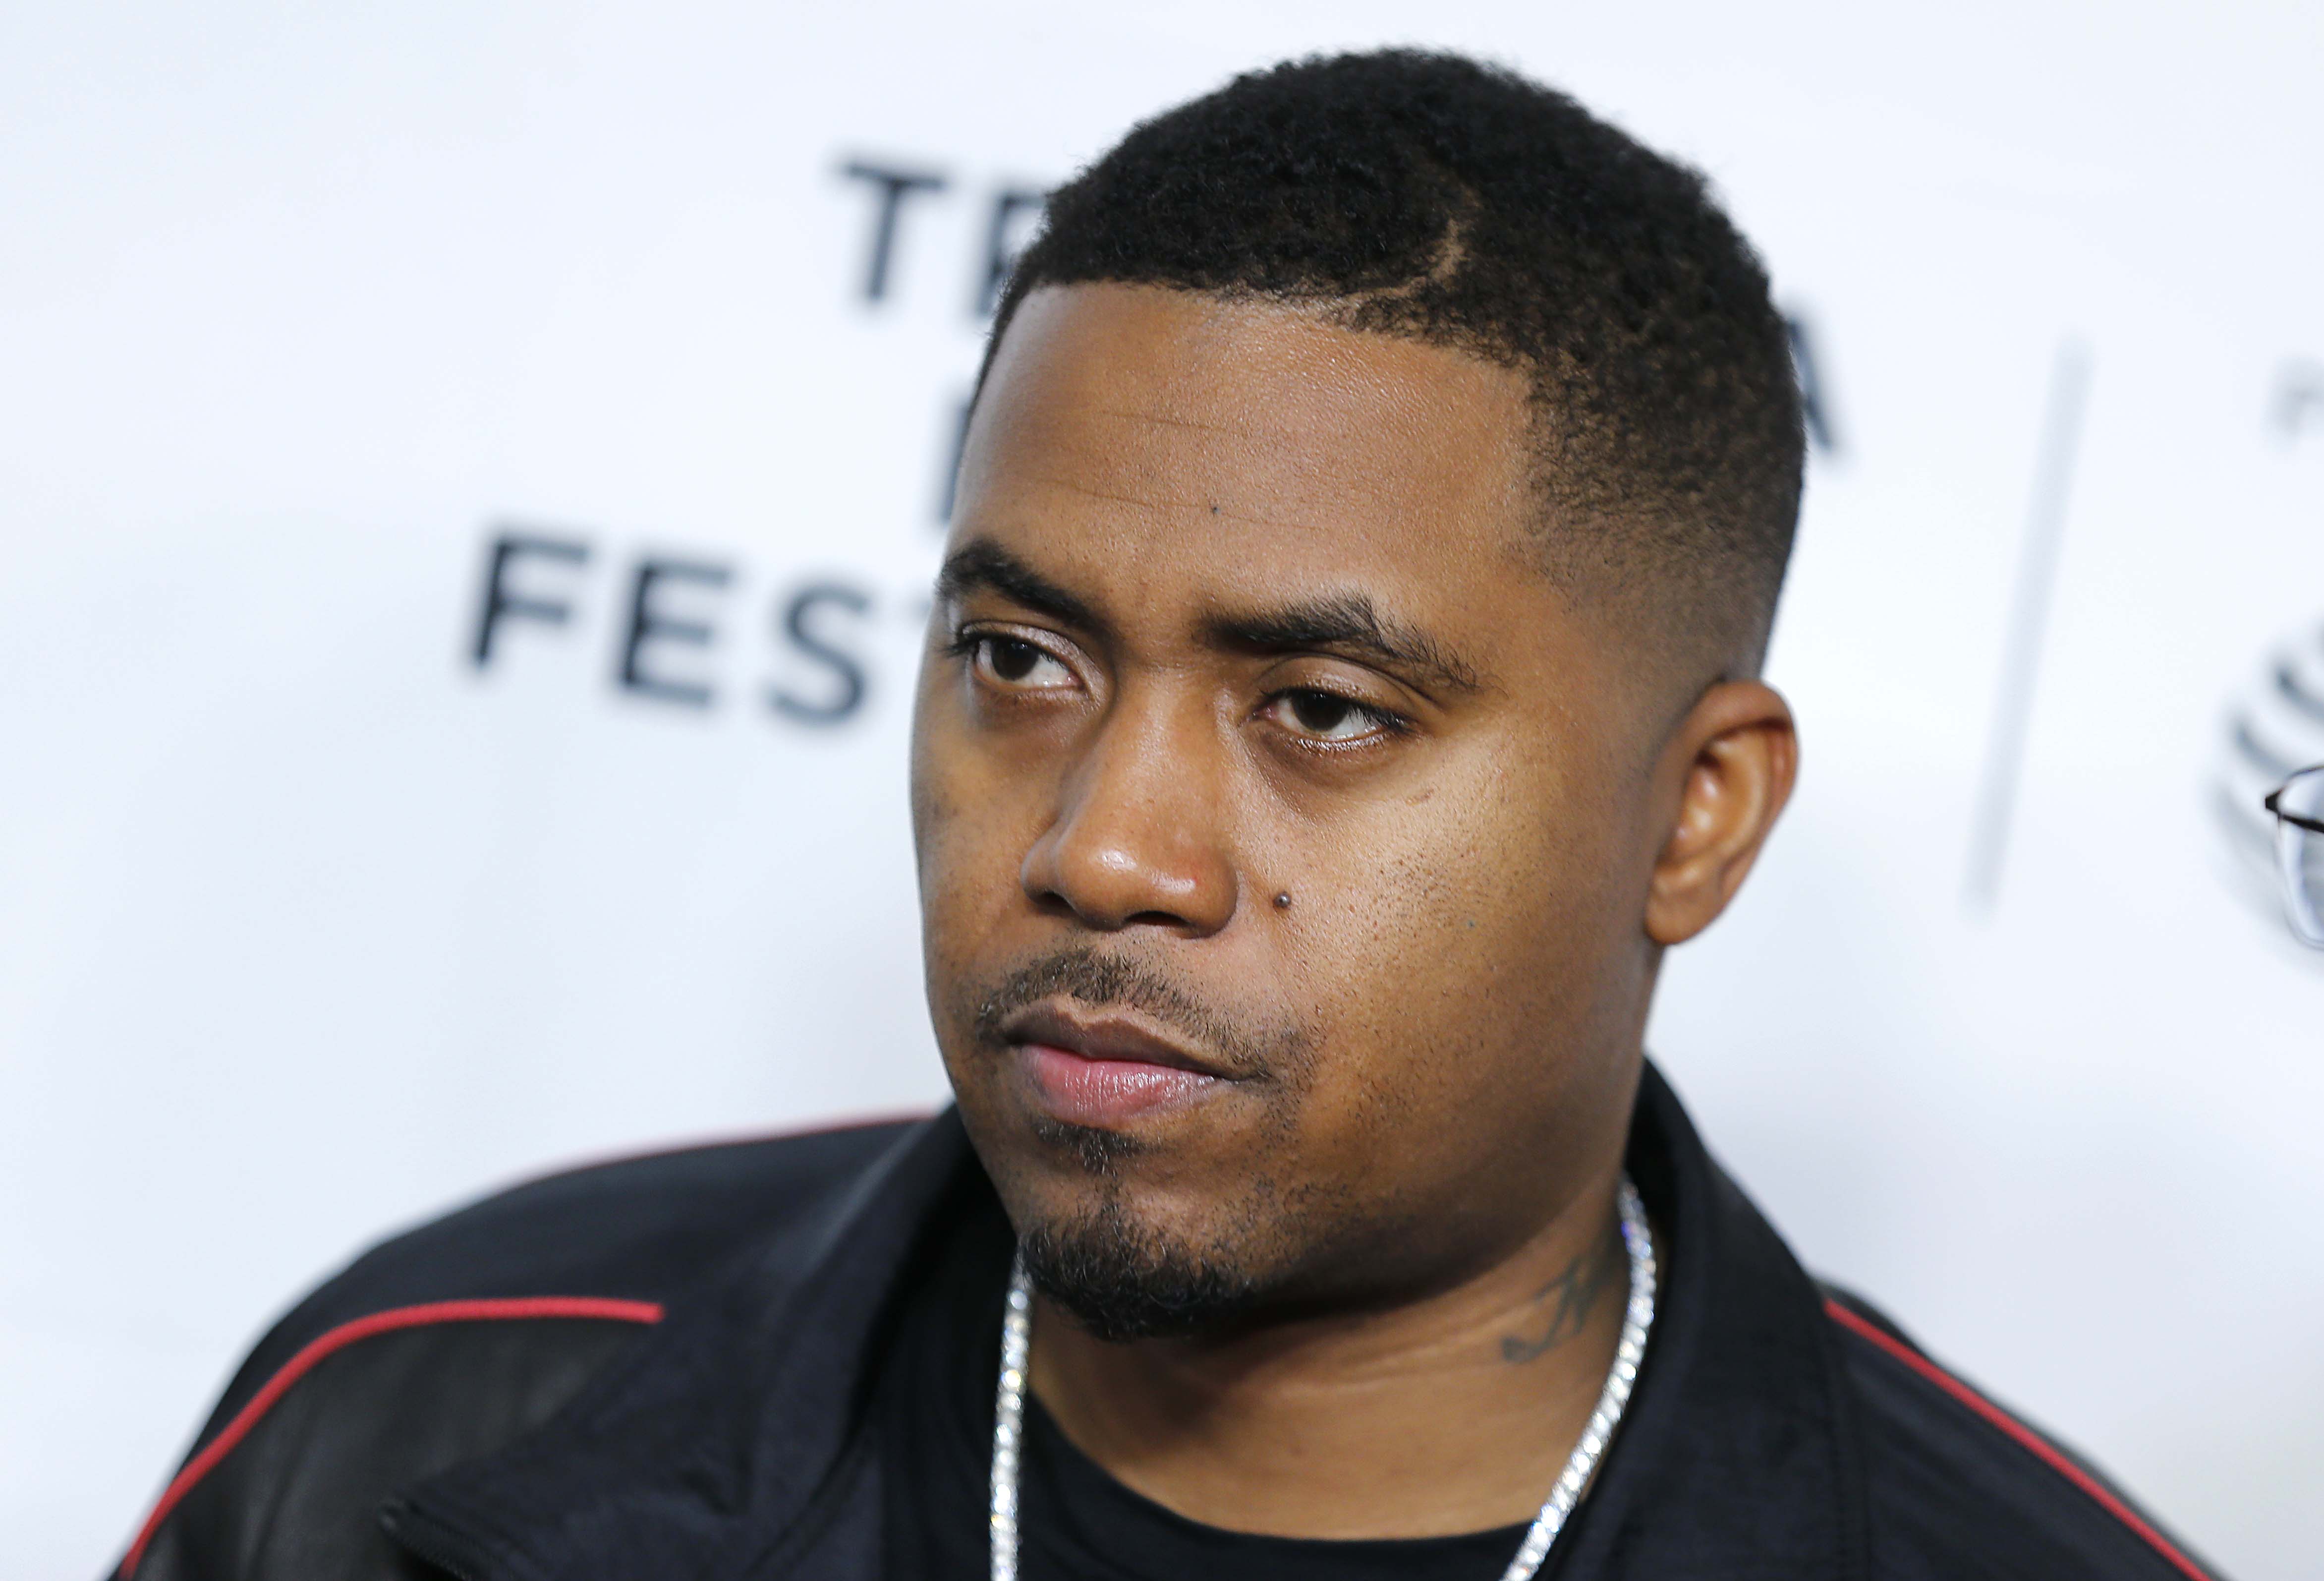 Nas & Wu-Tang Clan Debut “NY State Of Mind Tour” Documentary